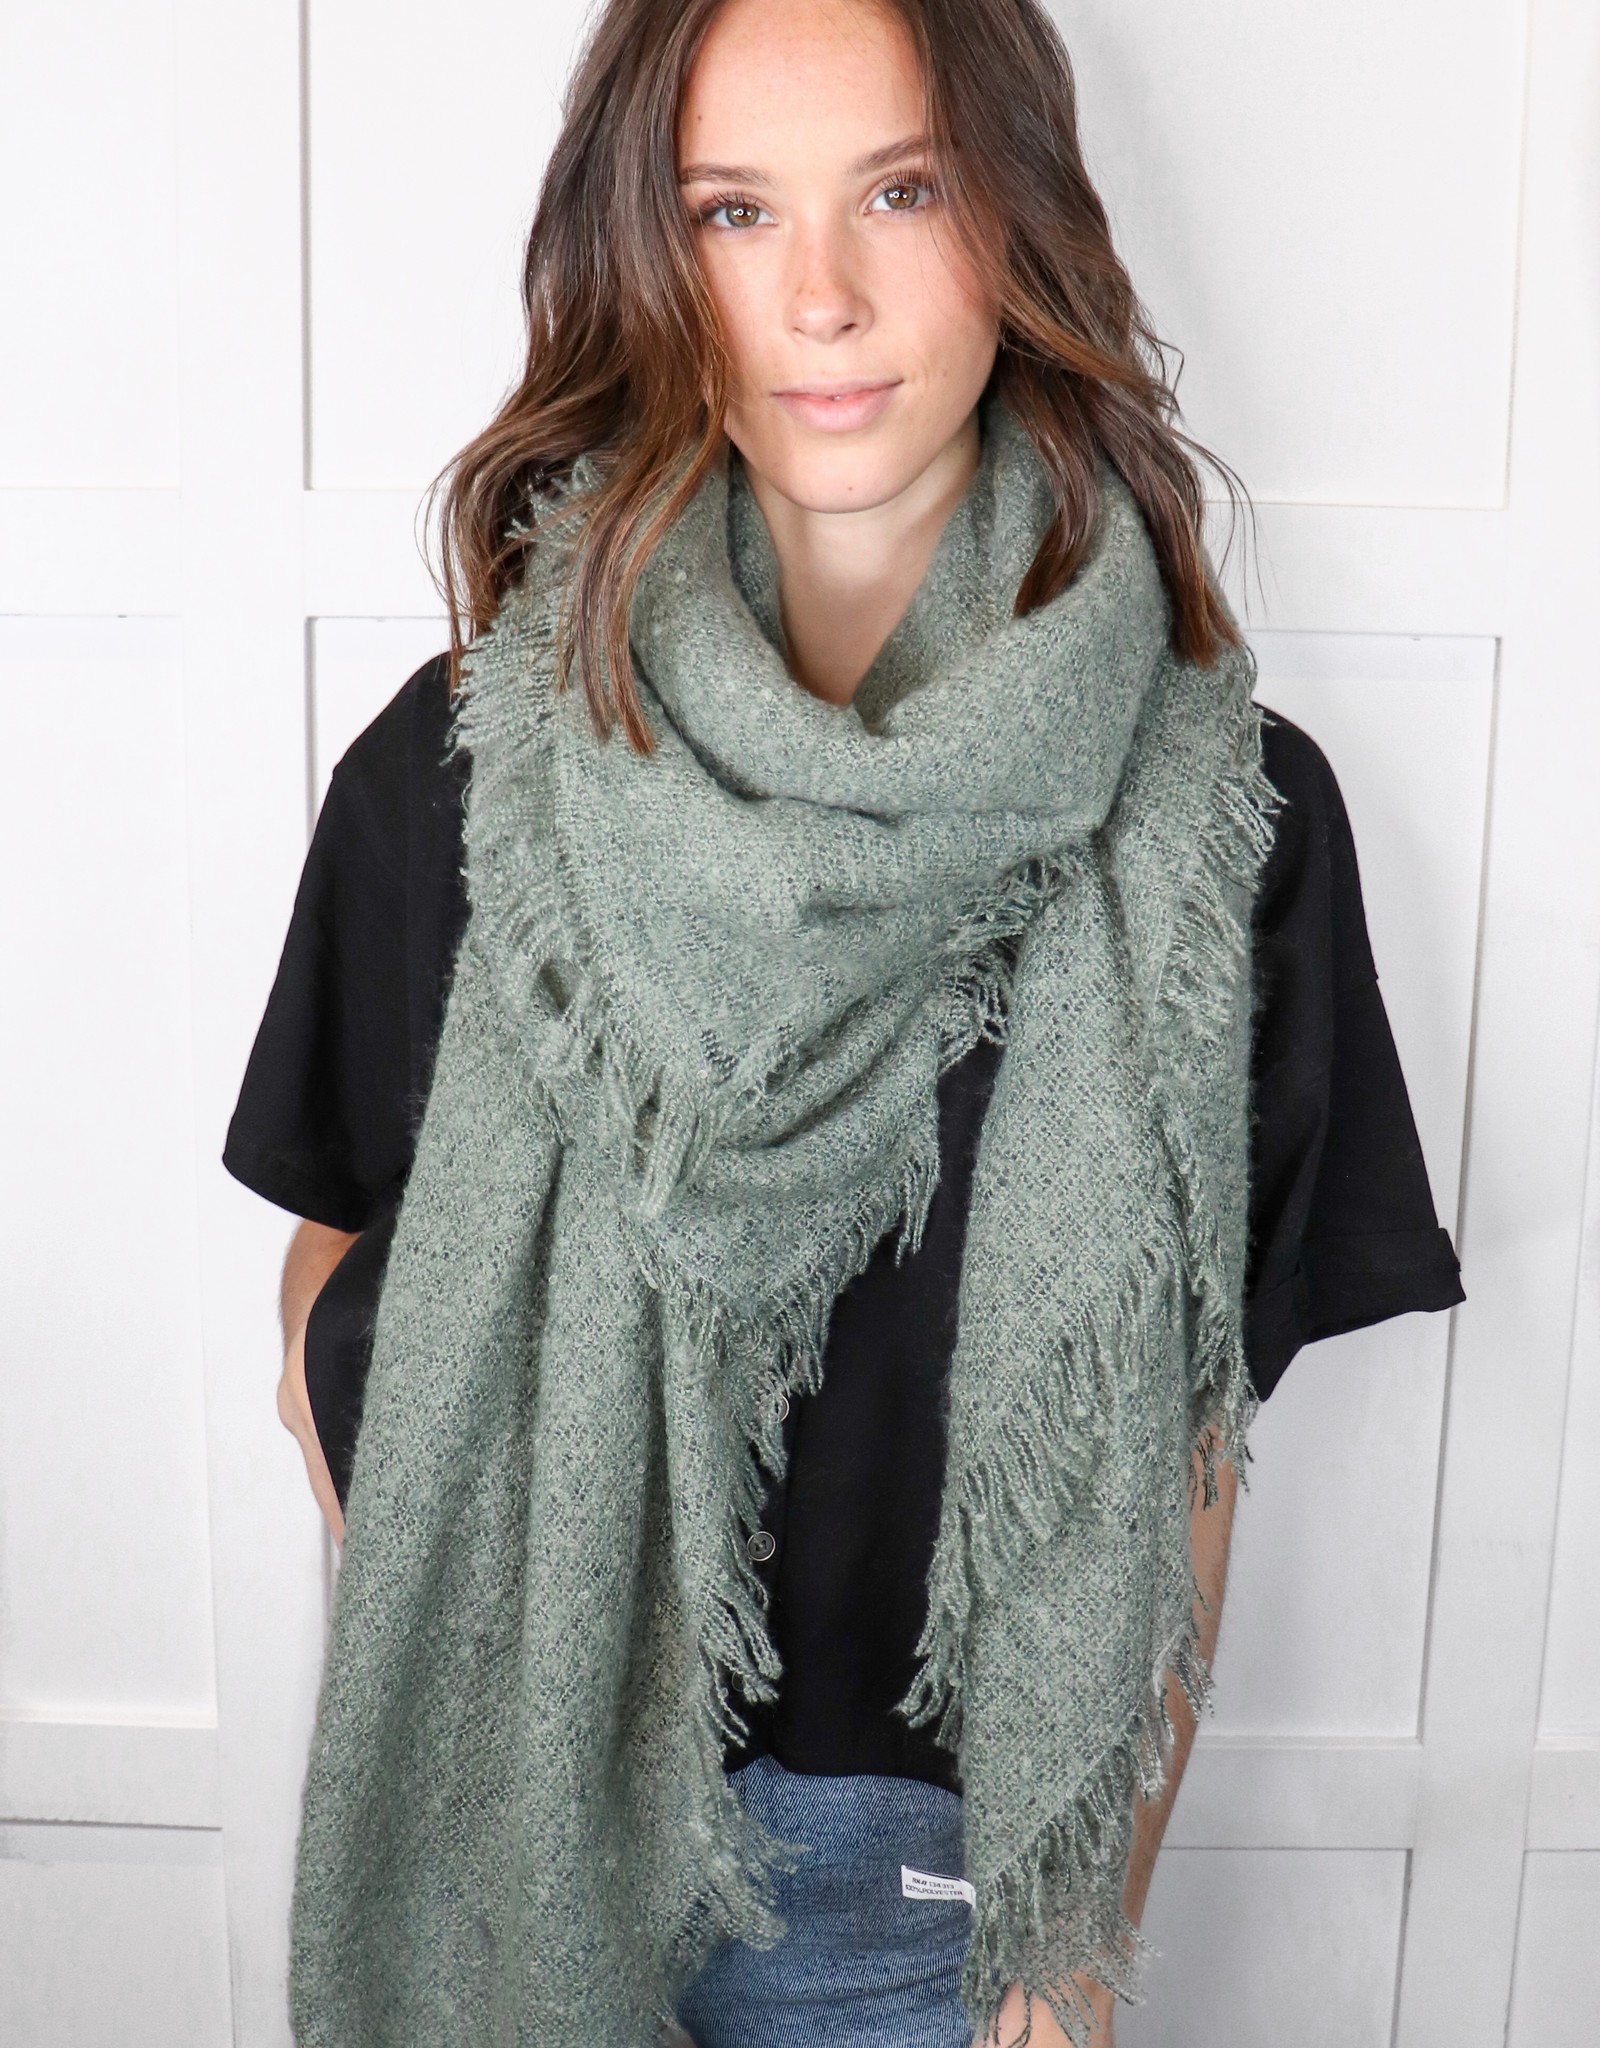 Leto Collection - Mohair Square Blanket Scarf $21 – Thank you